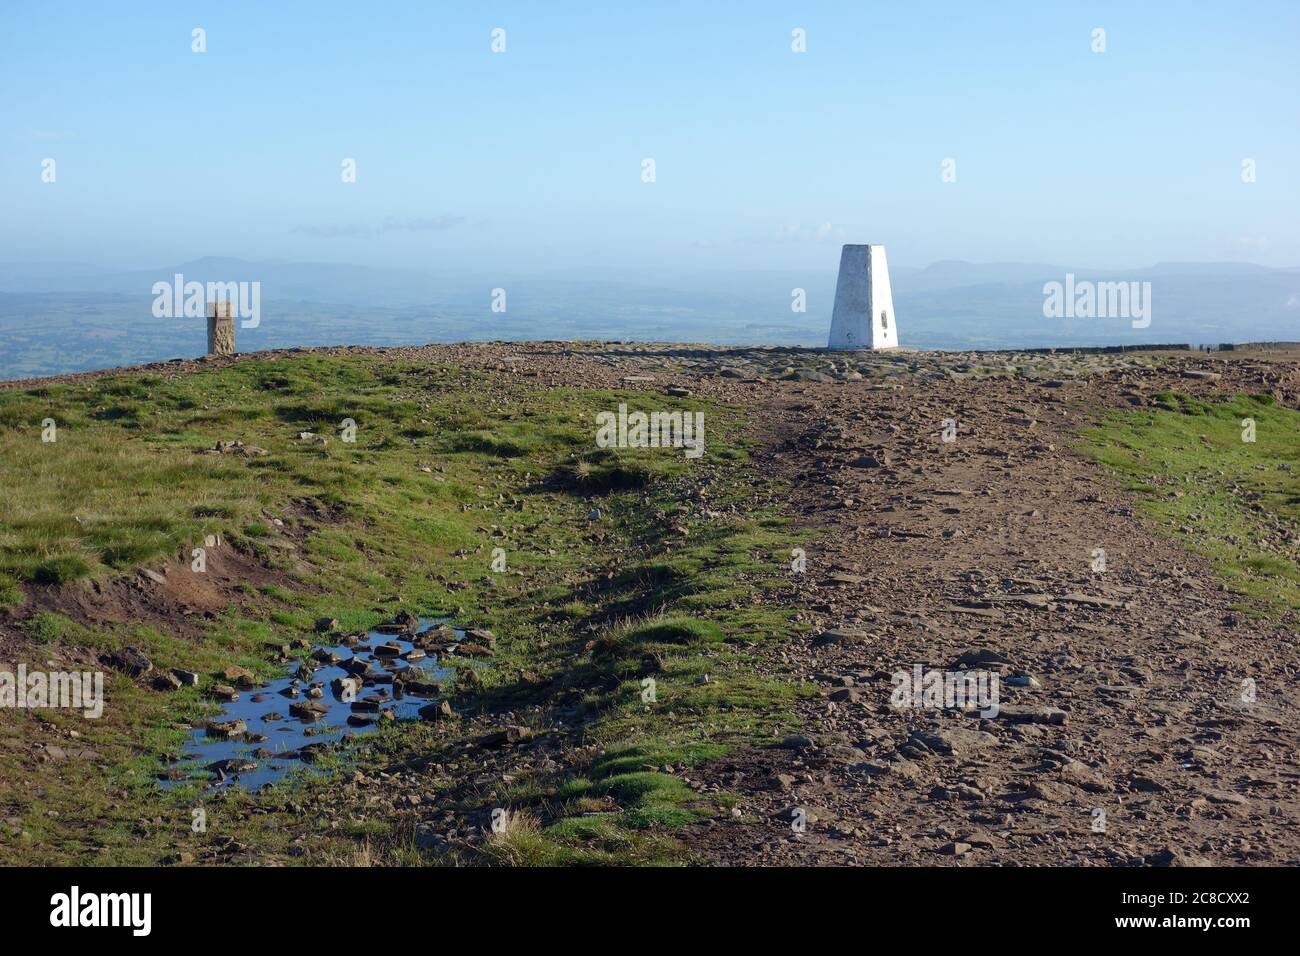 The Stone Waymarker & Concreate Triangulation Pillar (Trig Point) on the Summit of Pendle Hill on the Pendle Way Footpath from Barley, Lancashire, UK. Stock Photo